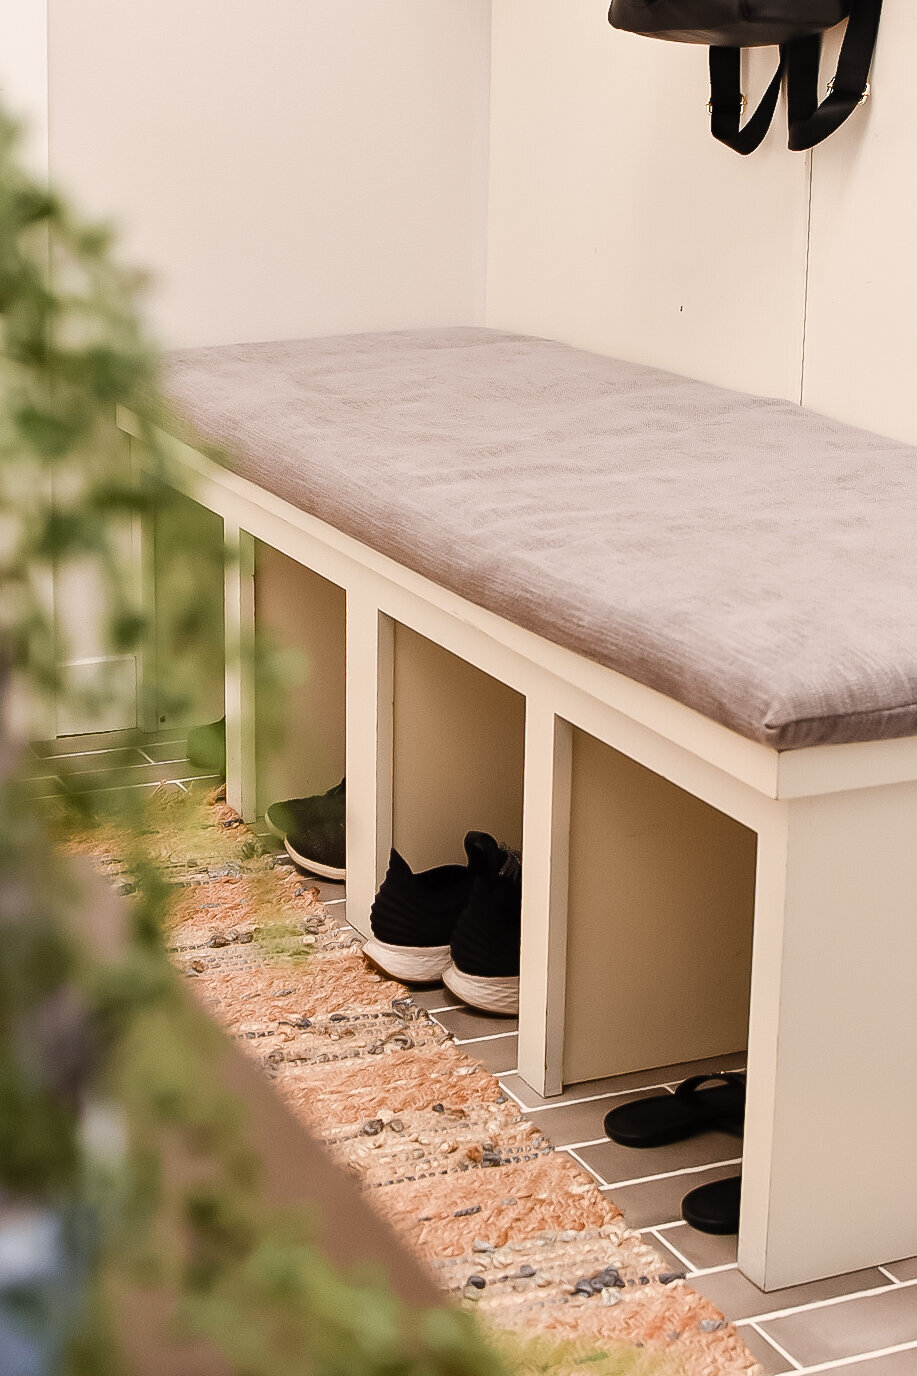 An entryway bench hides shoes in cubby holes